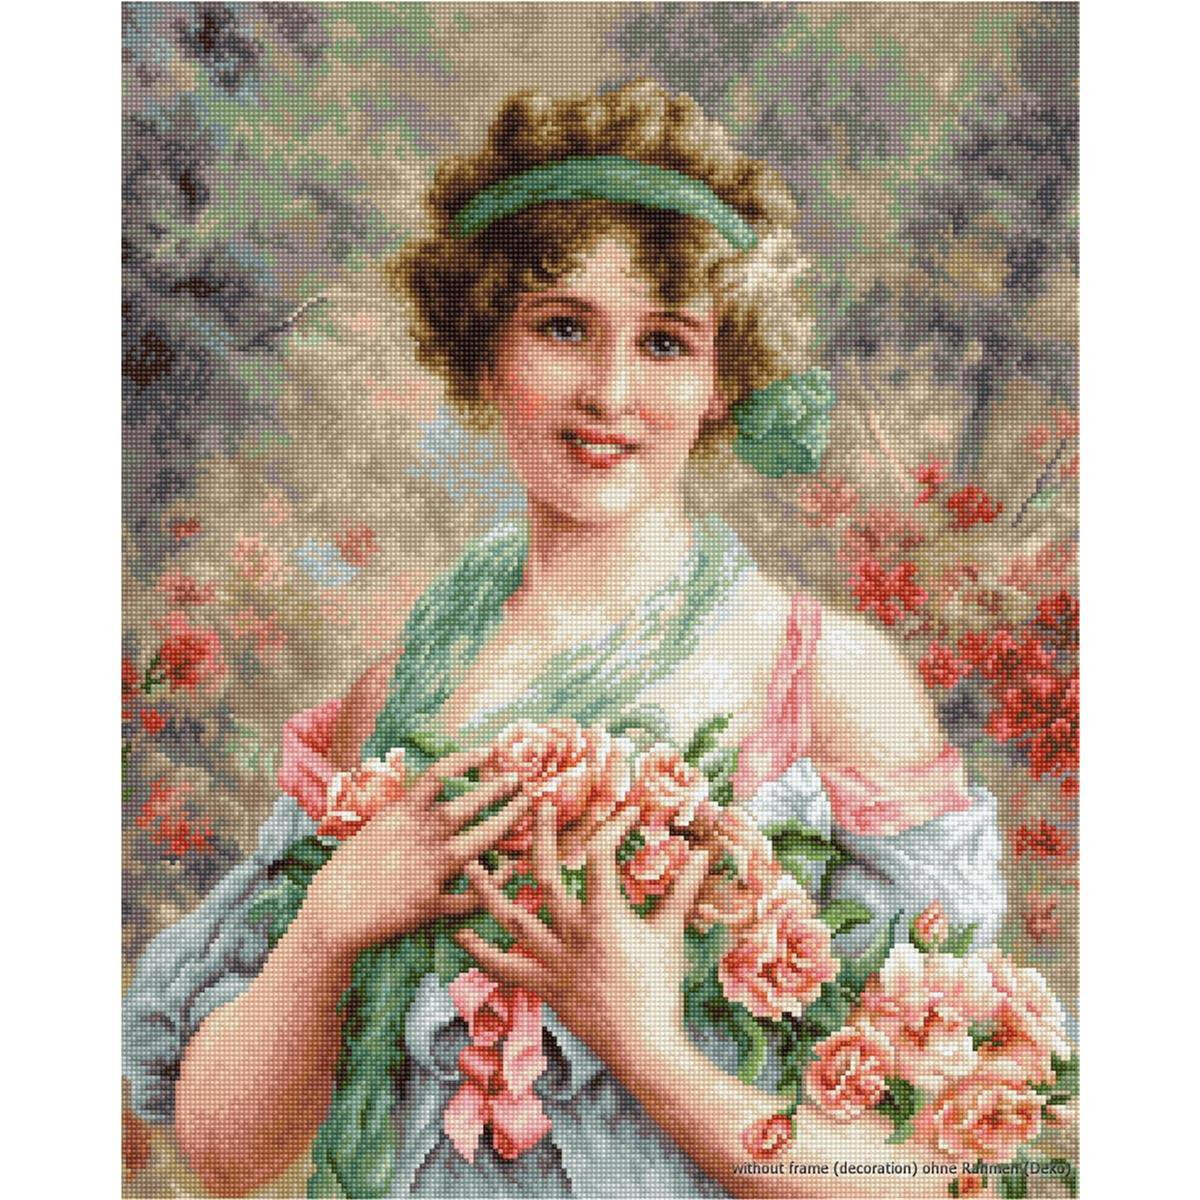 Luca-S counted Cross Stitch kit "The Girl with...